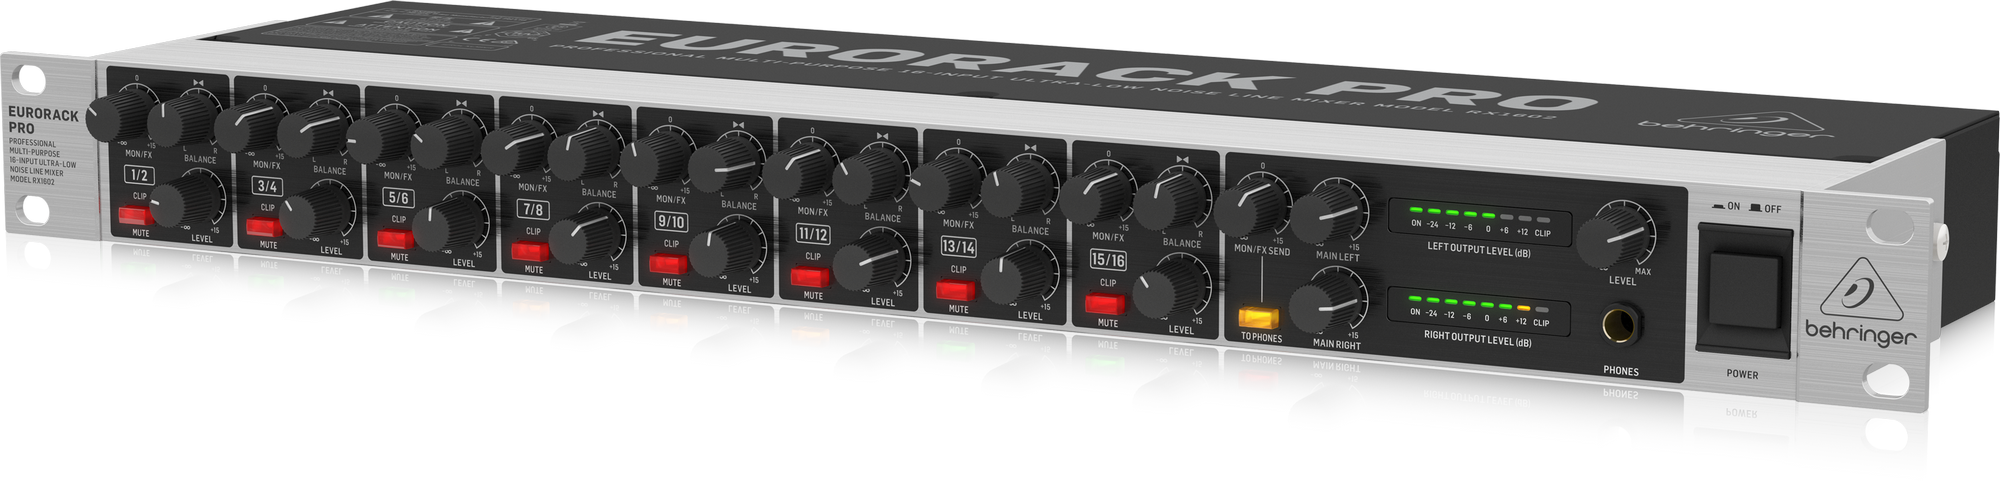 Behringer | Product | RX1602